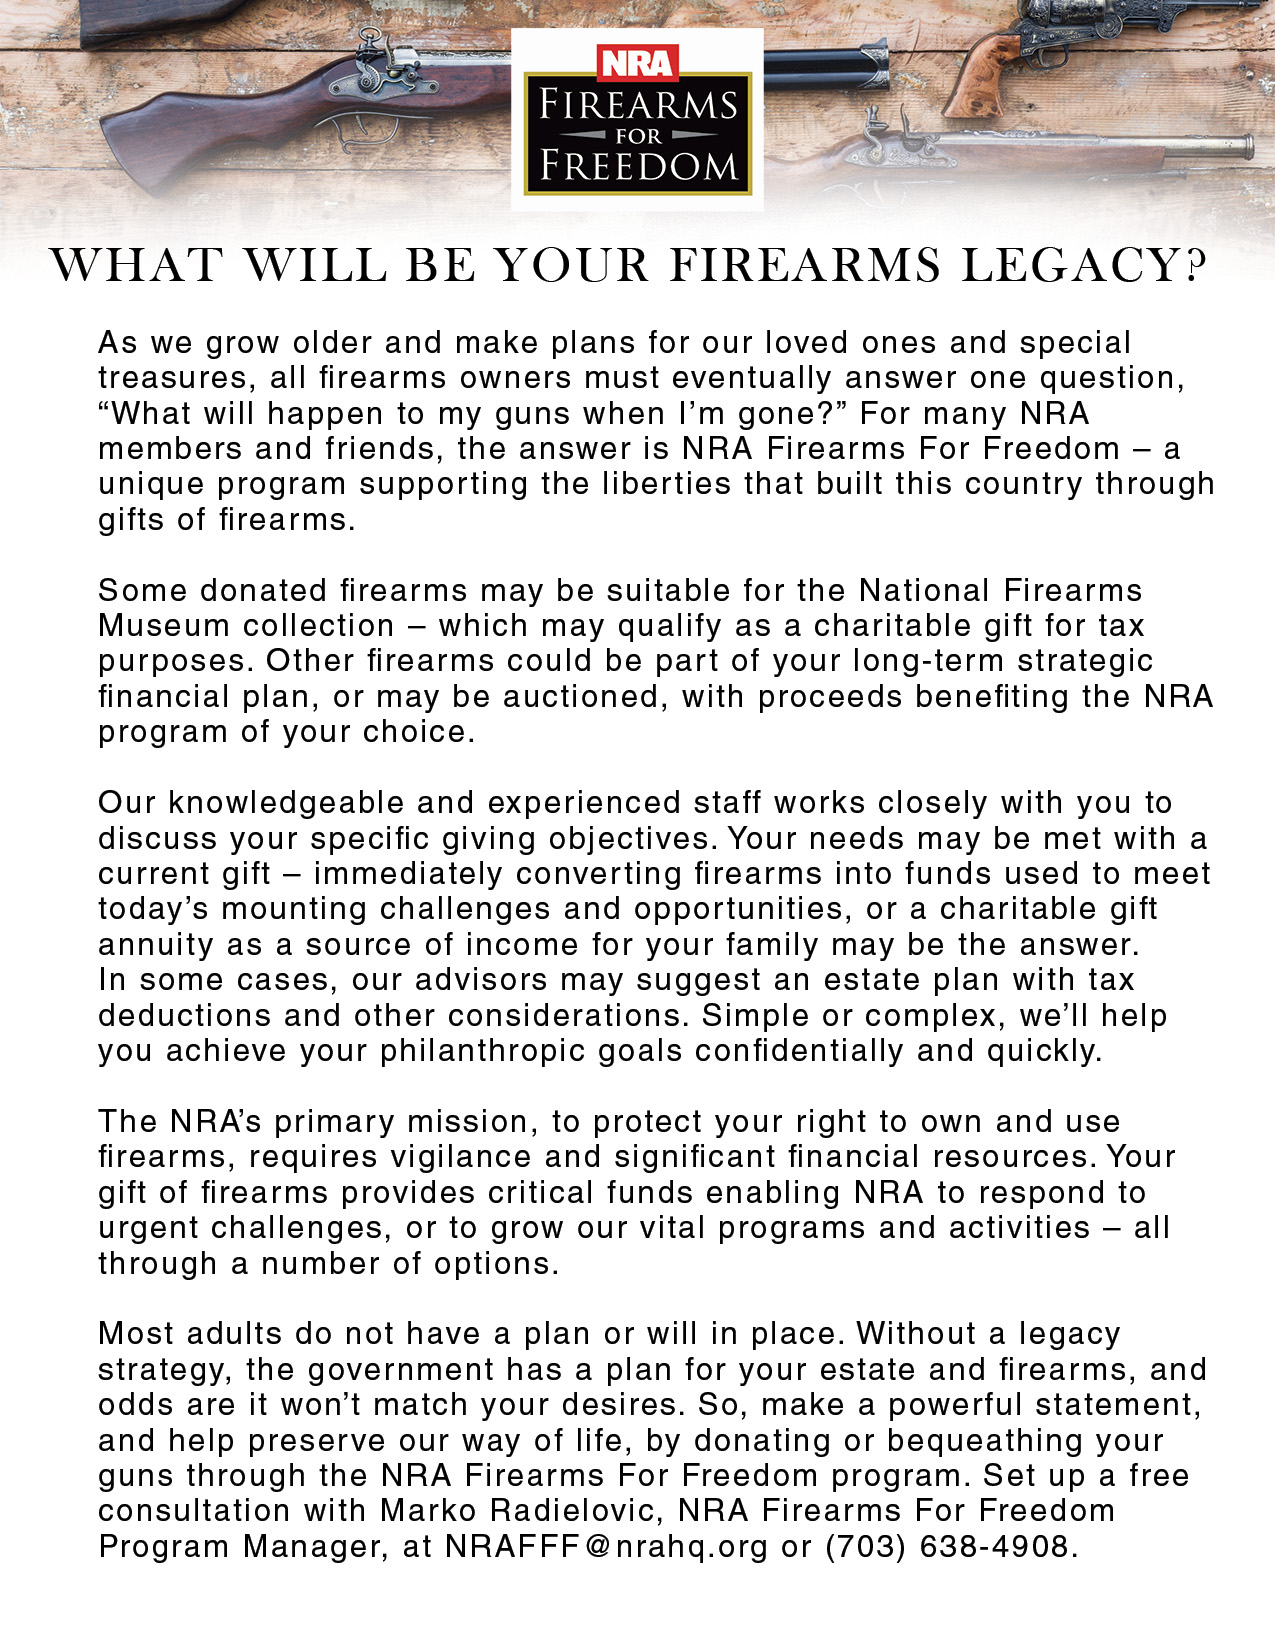 Firearms for freedom ad quarter page